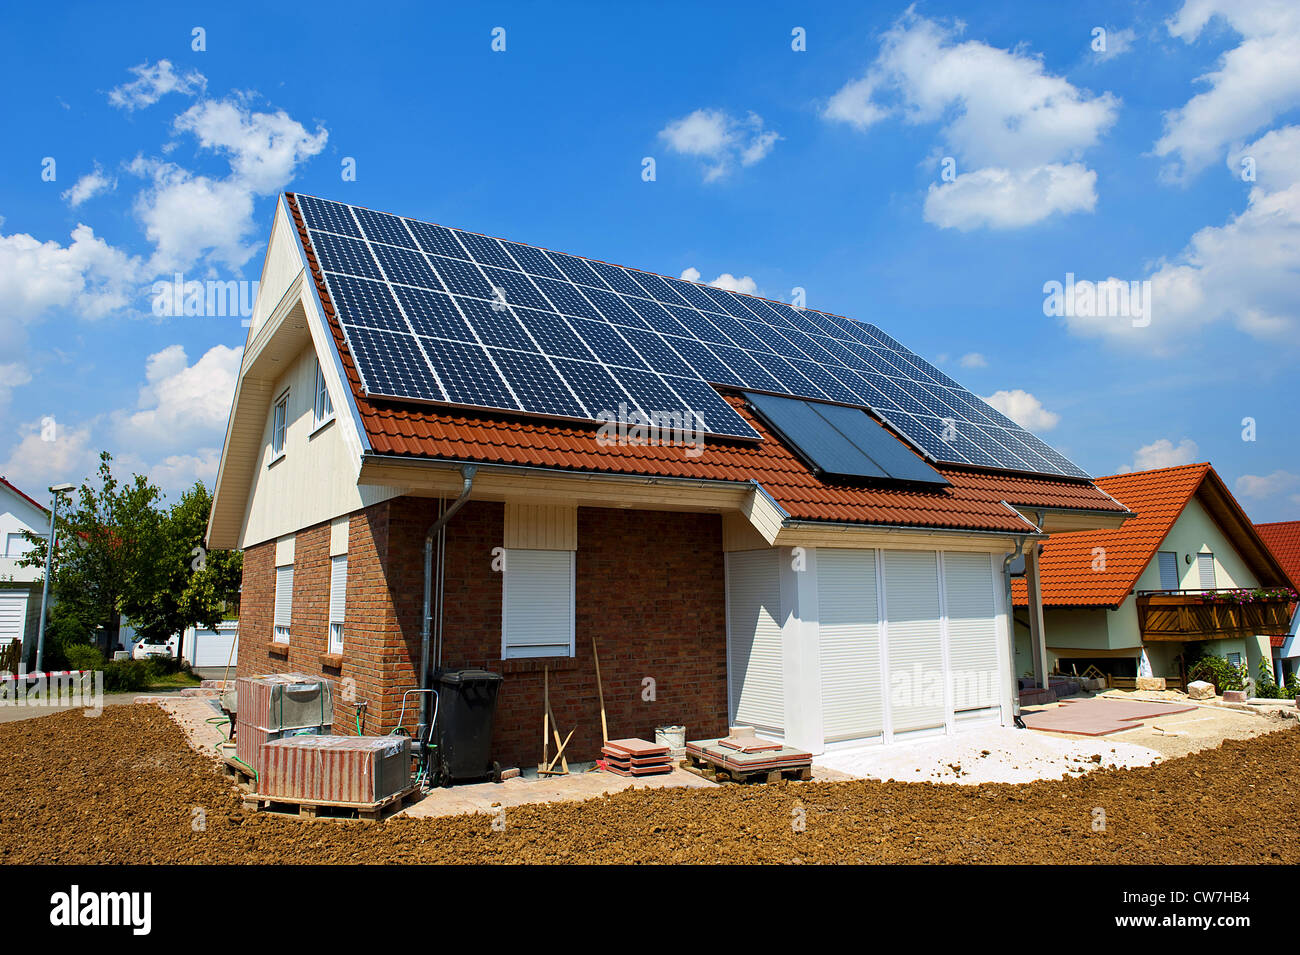 photovoltaic roof system on home, Germany Stock Photo - Alamy